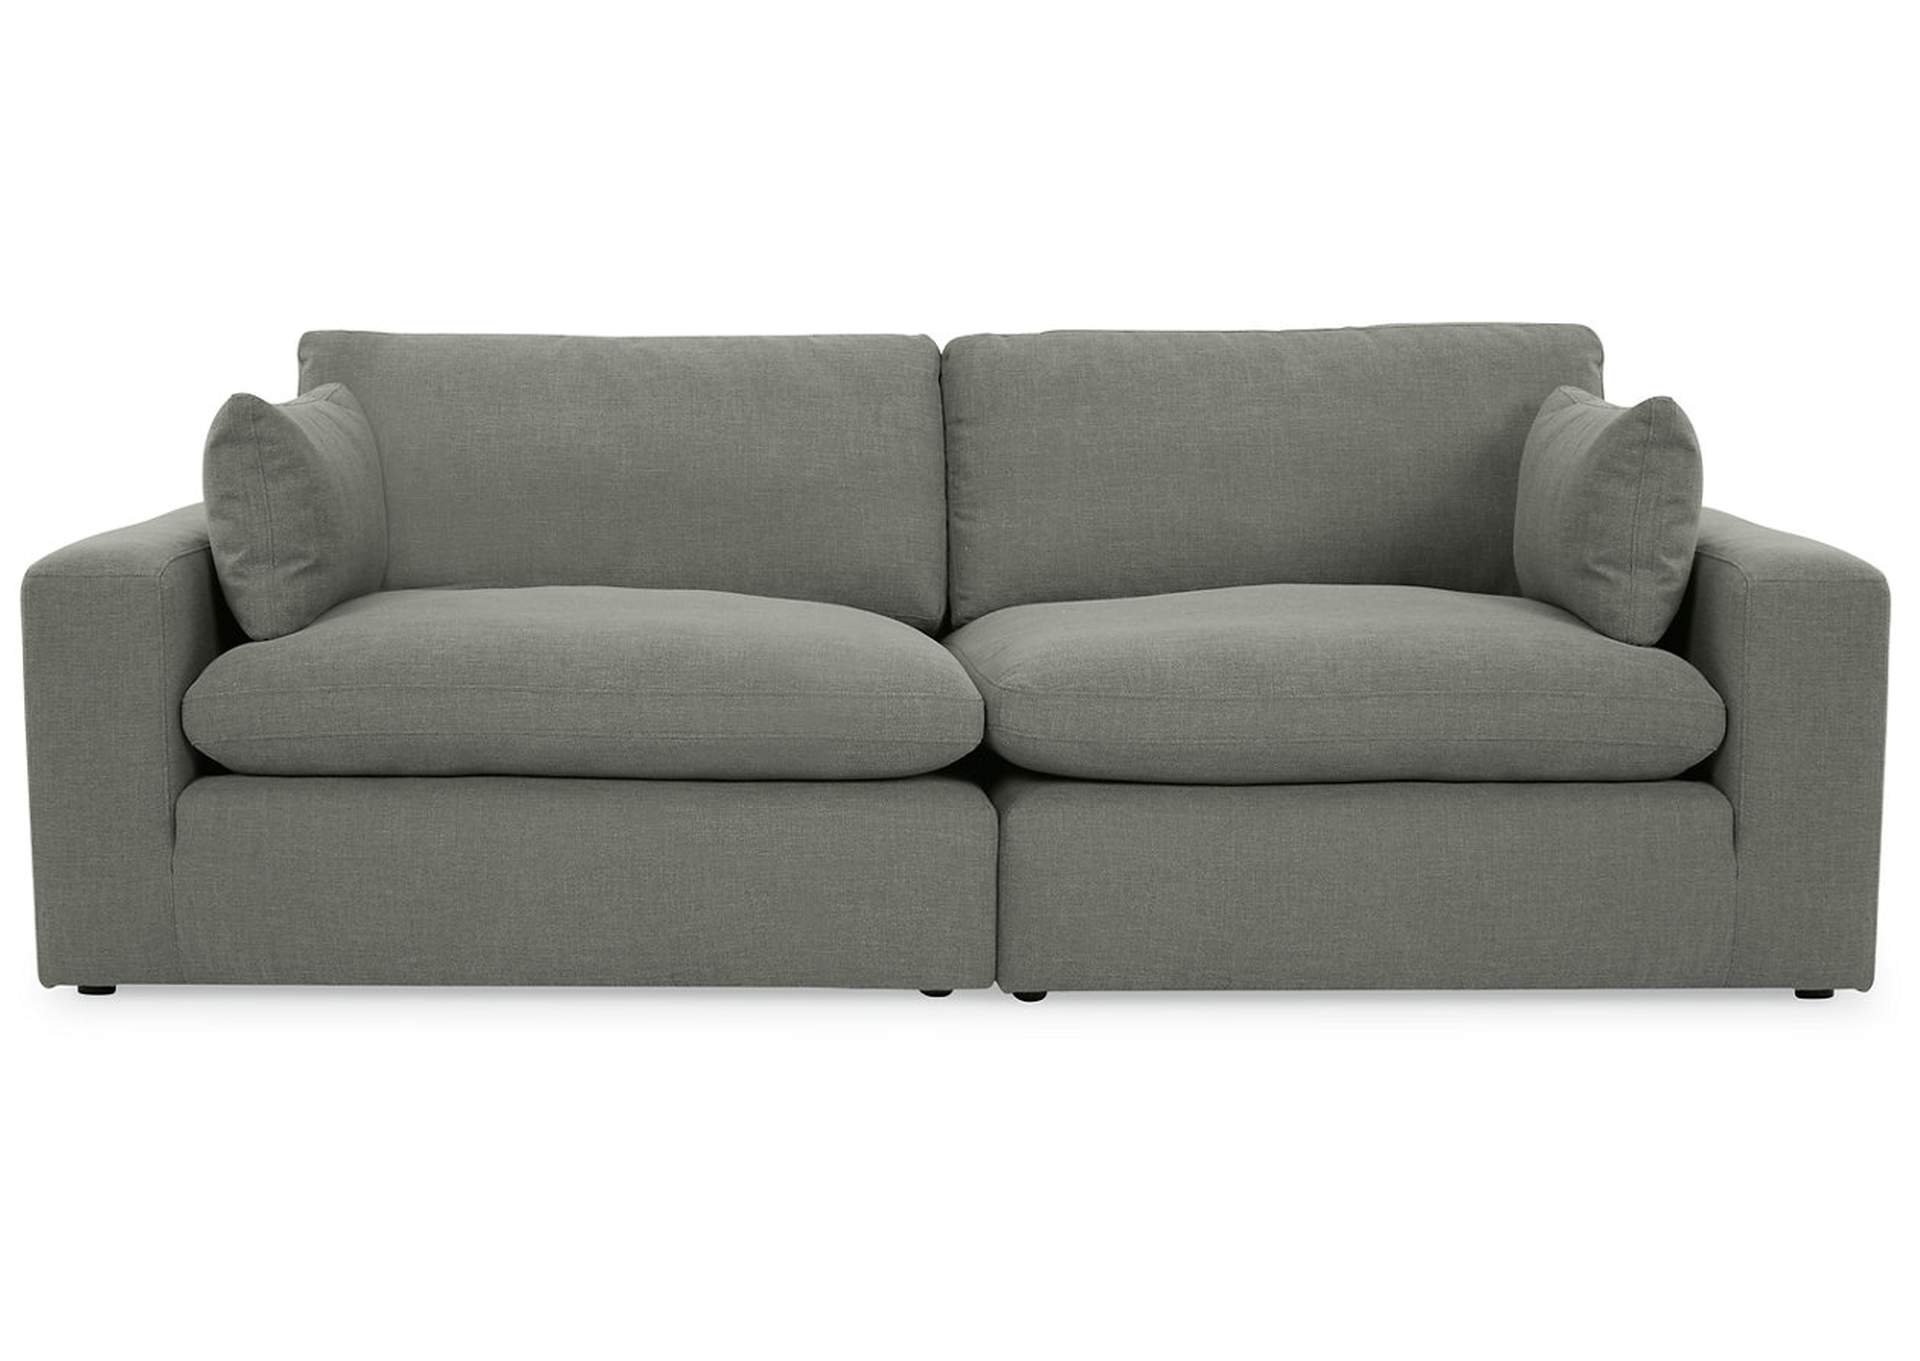 Elyza 2-Piece Sectional Loveseat,Benchcraft